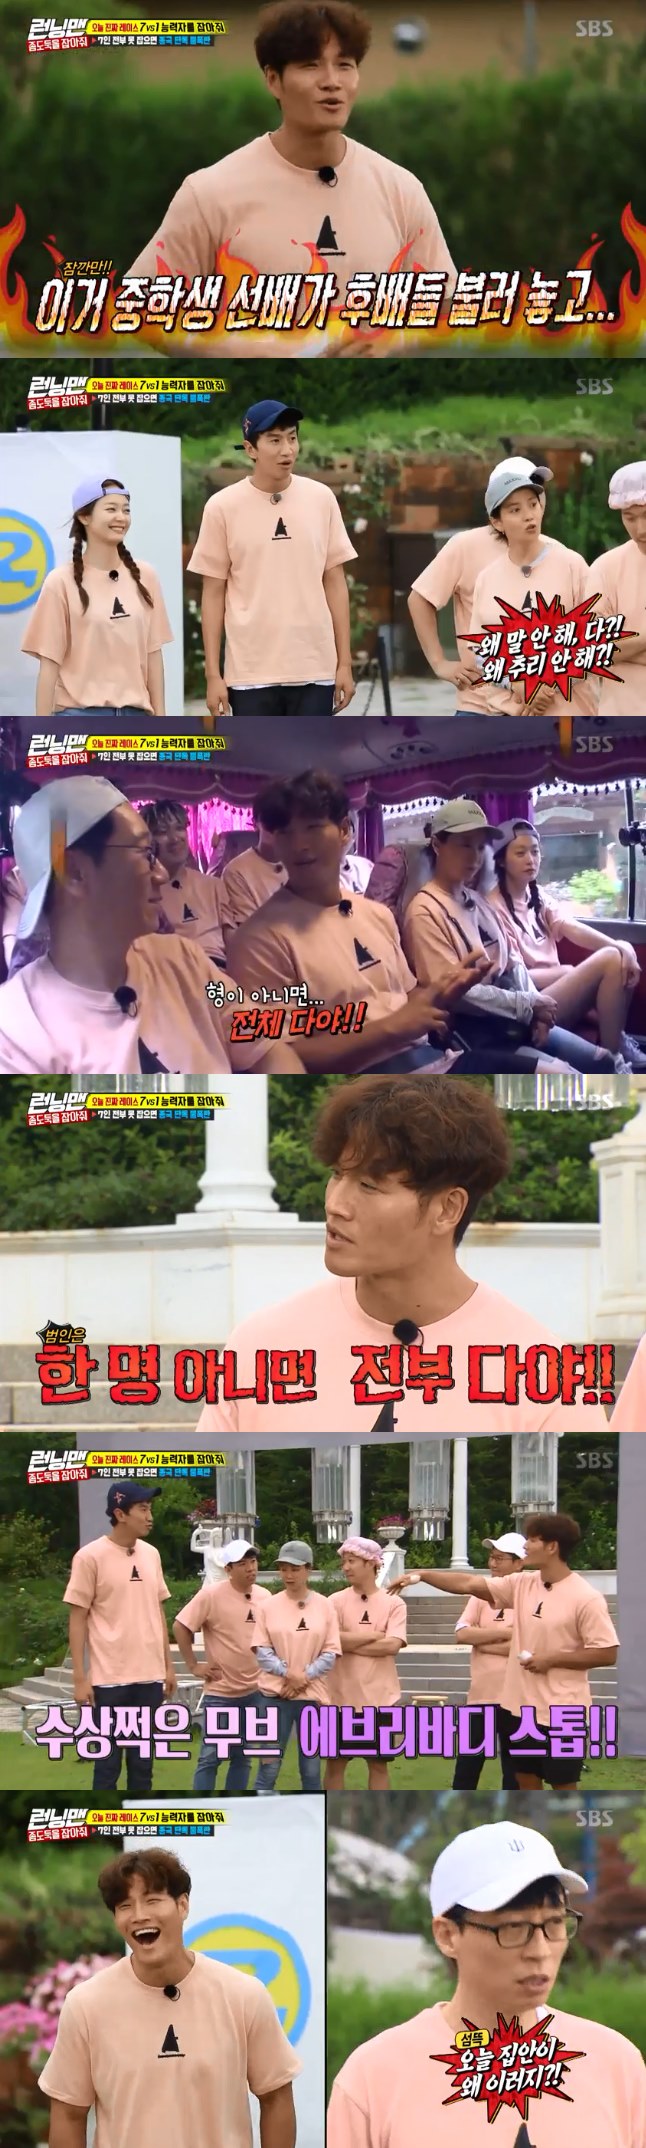 On SBS Running Man broadcasted on the 29th, the Little Thief search mission was given to take Kim Jong-kook shoes.I had to find The Little Thief with a step-by-step hint.The mission began at the restaurant. Kim Jong-kook, whose shoes disappeared, asked, Who took it, is this a mission? And then he said, Its strange. Why give me flowers?Suk Jin-is older brother is also strange, he began to suspect.In fact, everyone except Kim Jong-kook was the perpetrator.The production team said in a preliminary meeting, The real mission name is Kim Jong-kook. I was sad to see that I could not beat seven Seo-yool Lee Kim Jong-kook.Lee Kwang-soo appeared first on the scene, The Little Thief played an important role, he said, I like the important thing, but why is the name?Yang Se-chan also said, I am a big style, not The Little Thief.Seven Seo-yool Lee united but the result was Kim Jong-kook perfect victory: Everyone has a strange atmosphere.When we are given our mystery mission, everyone gathers and talks, but why do not you say a word? The embarrassed members began to stutter and avoid their seats.Yoo Jae-Suk said, I will be really scared if you get married later and come in with Why is the atmosphere of the house?Kim Jong-kook said, Then what really is right in the house is what is right.